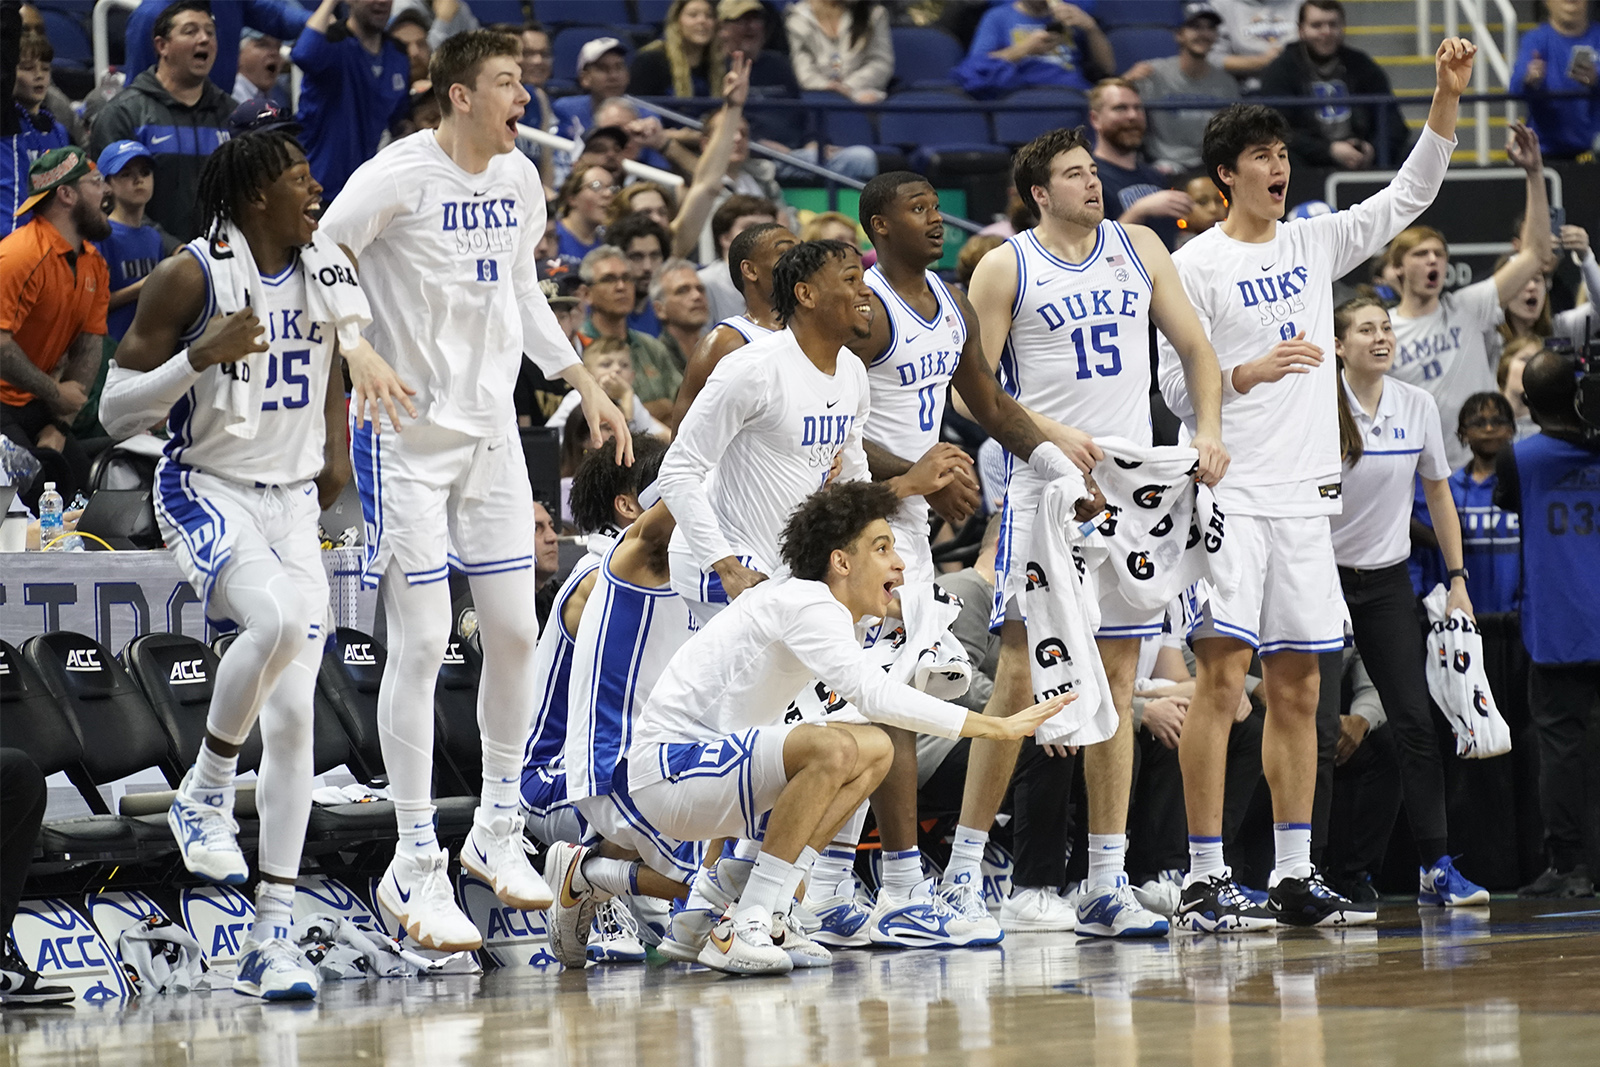 Duke players react to a teammate's basket during an NCAA college basketball game at the Atlantic Coast Conference Tournament in Greensboro, N.C., Thursday, March 9, 2023. (AP Photo/Chuck Burton)